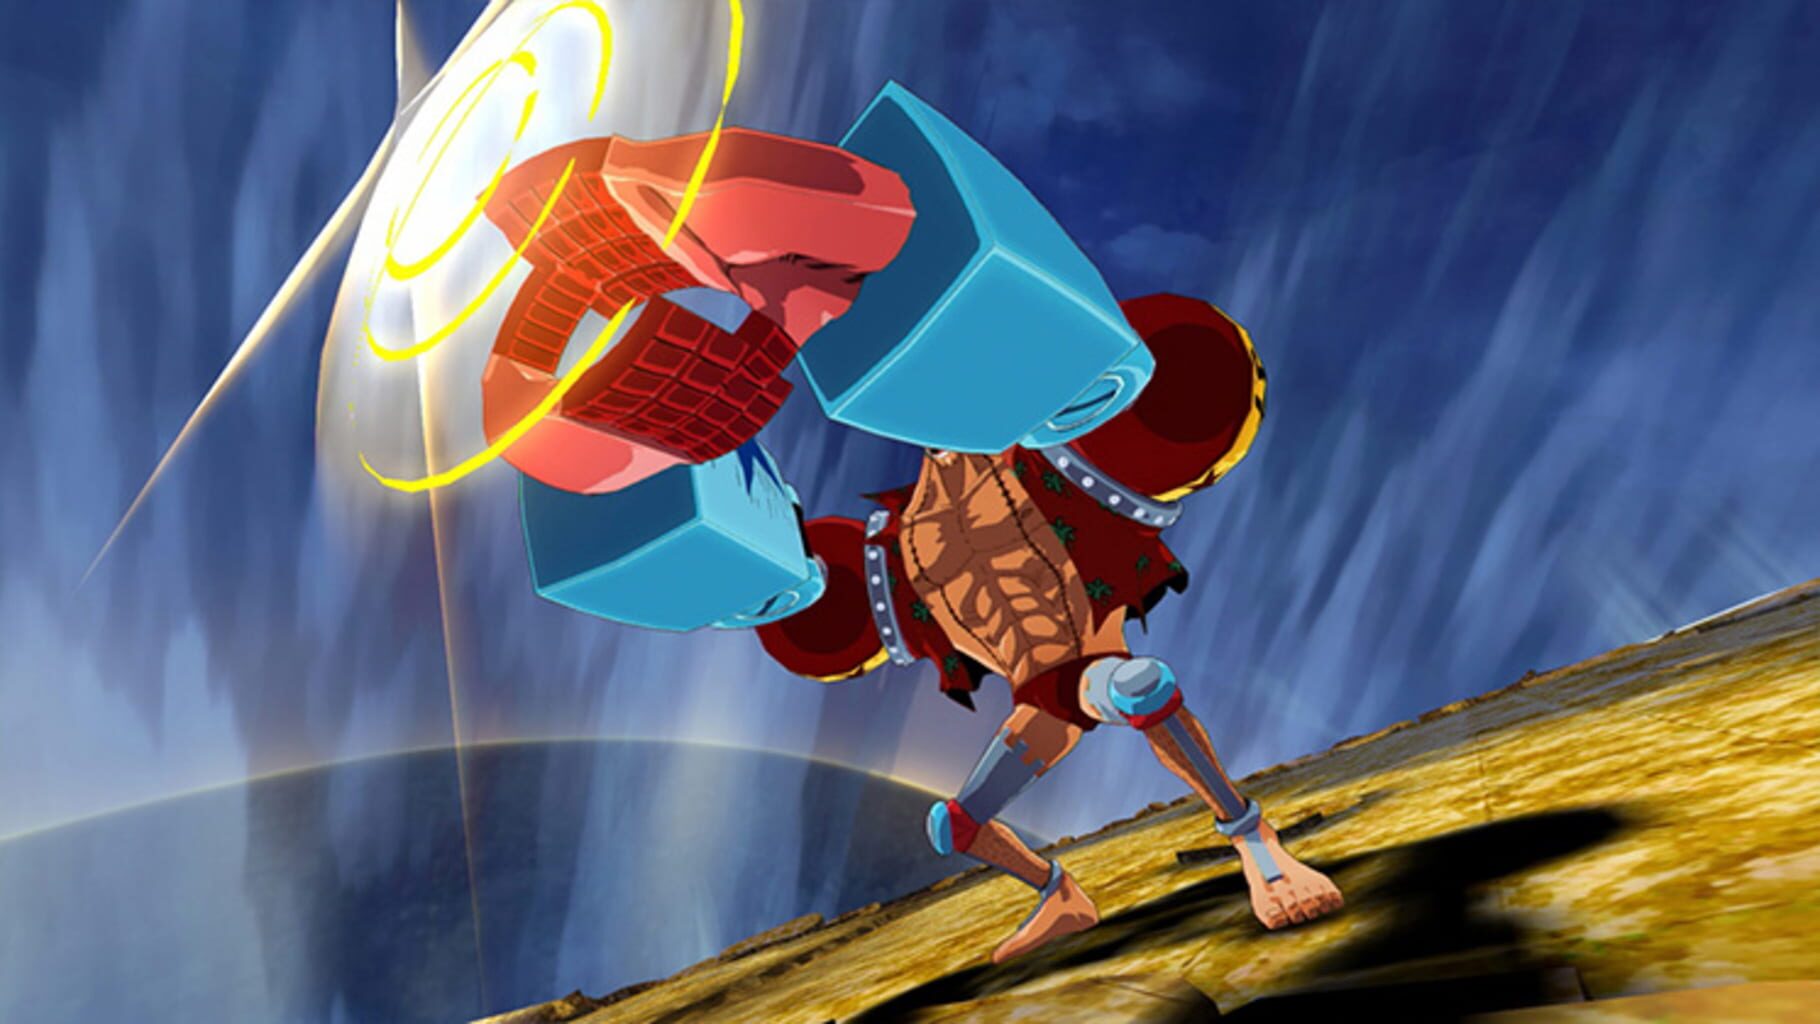 One Piece: Unlimited World Red - Deluxe Edition screenshot